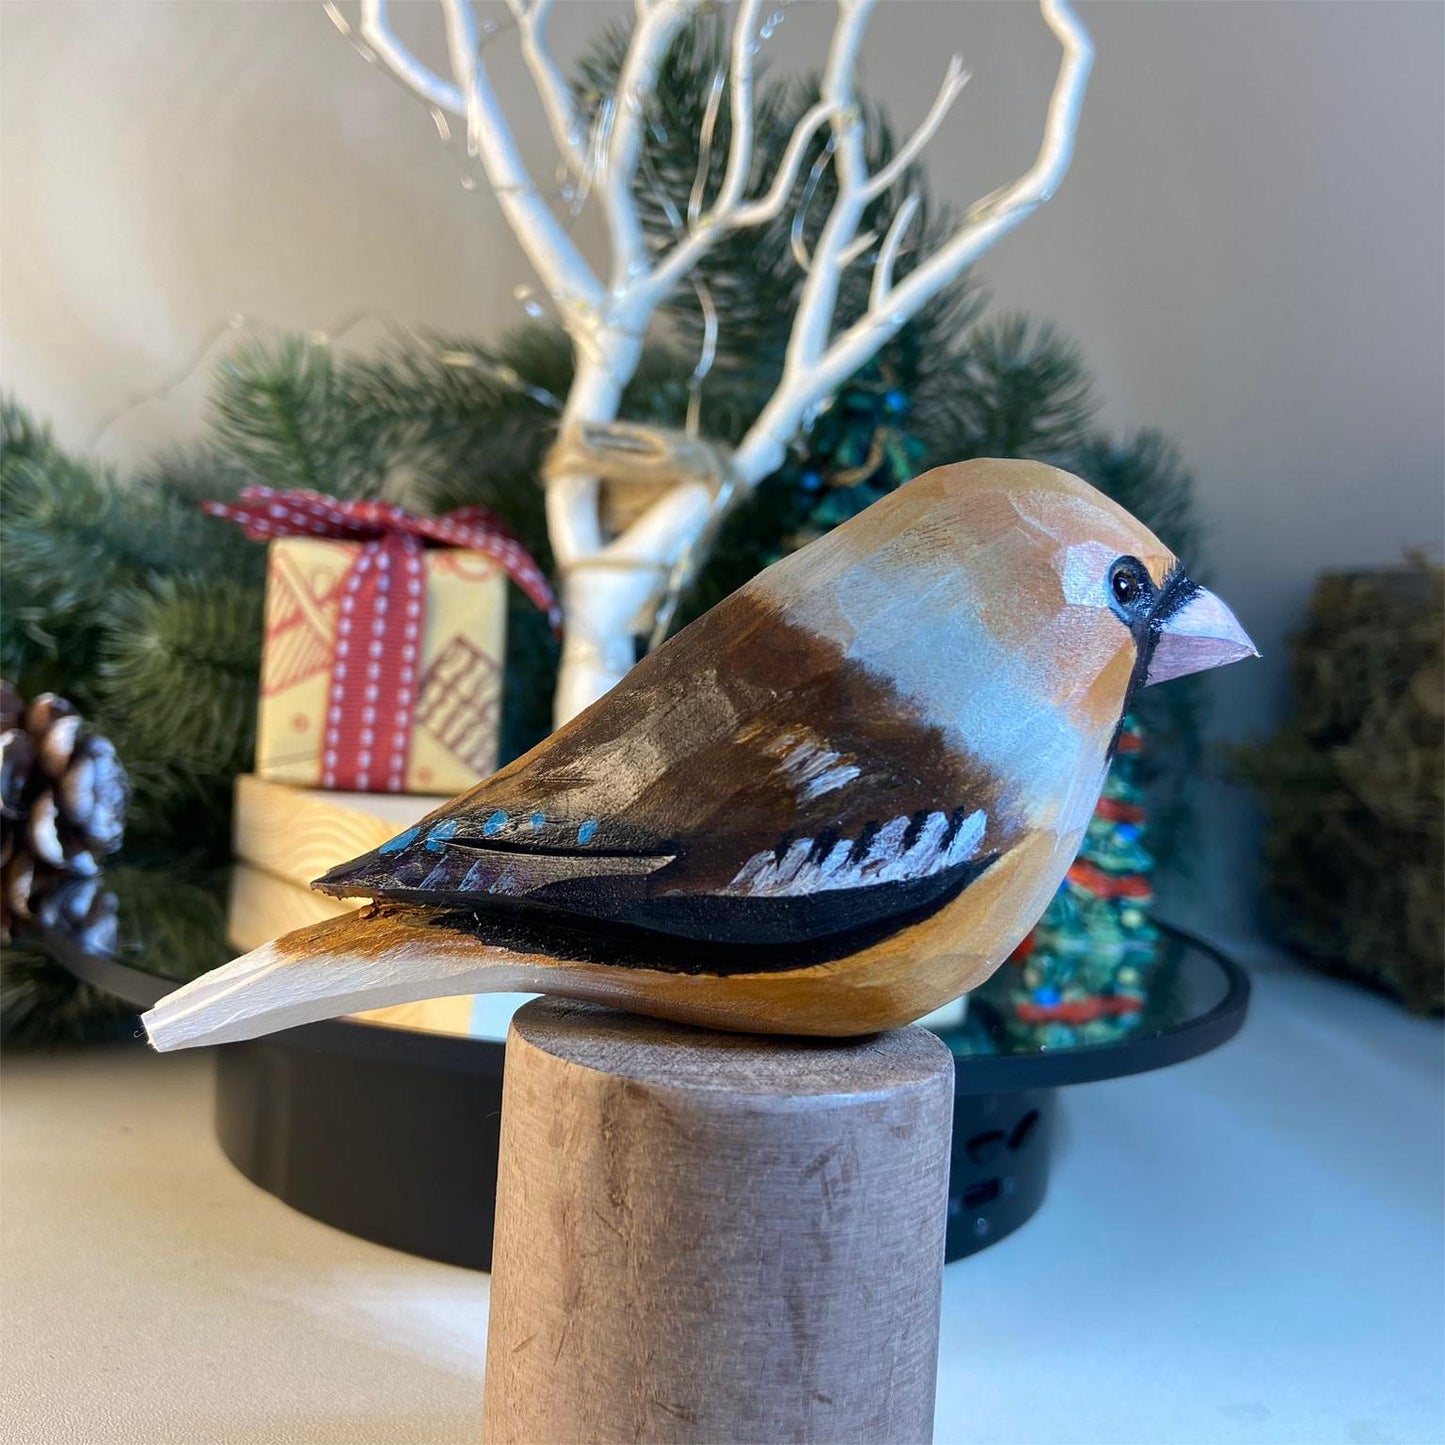 Handcrafted Hawfinch Figurine - Exquisite Hand-Painted Bird Sculpture for Nature Lovers and Collectors